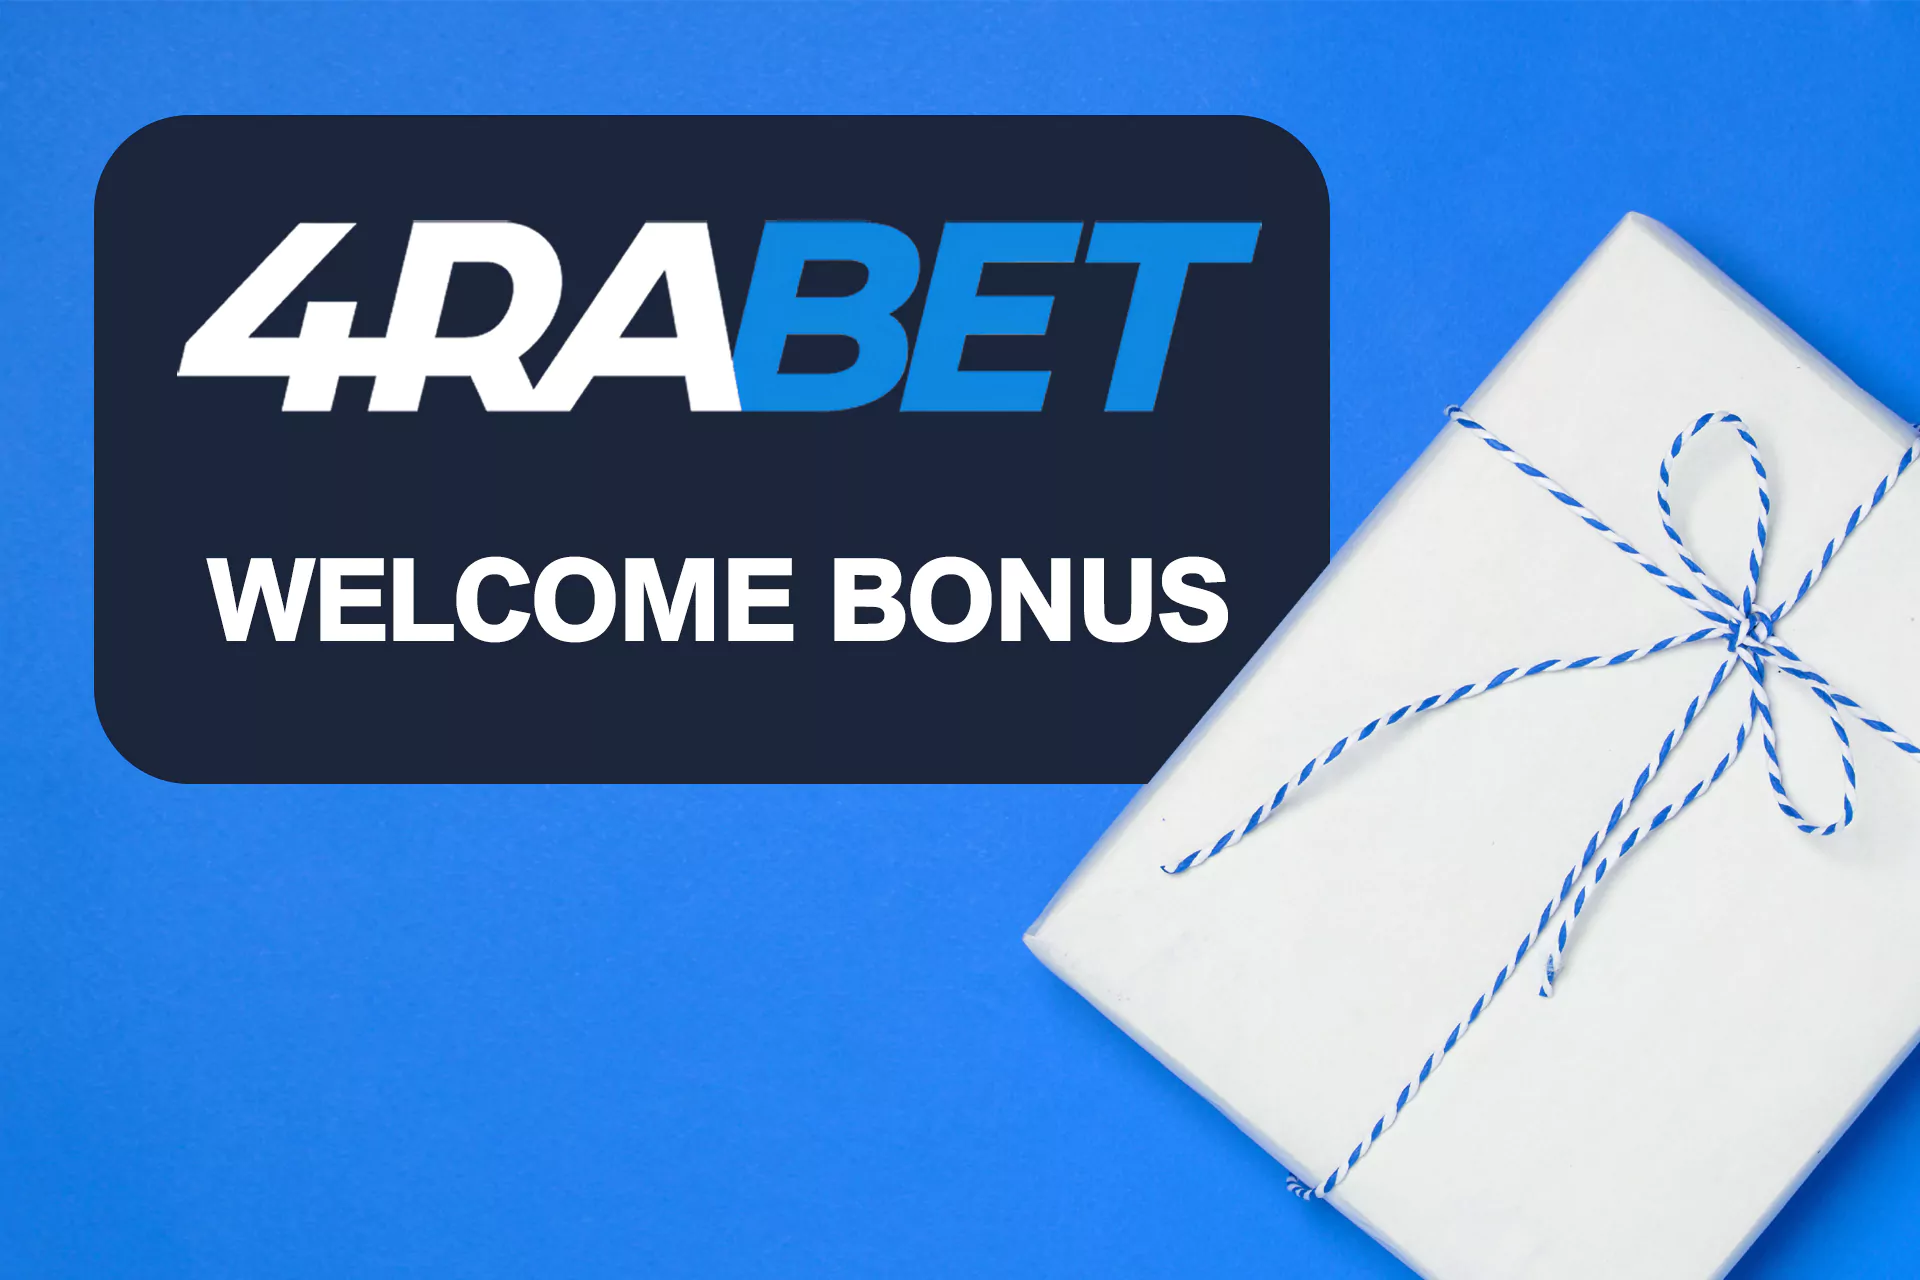 If you sign up on 4rabet you can claim a welcome bonus for betting on sports or playing casino games.